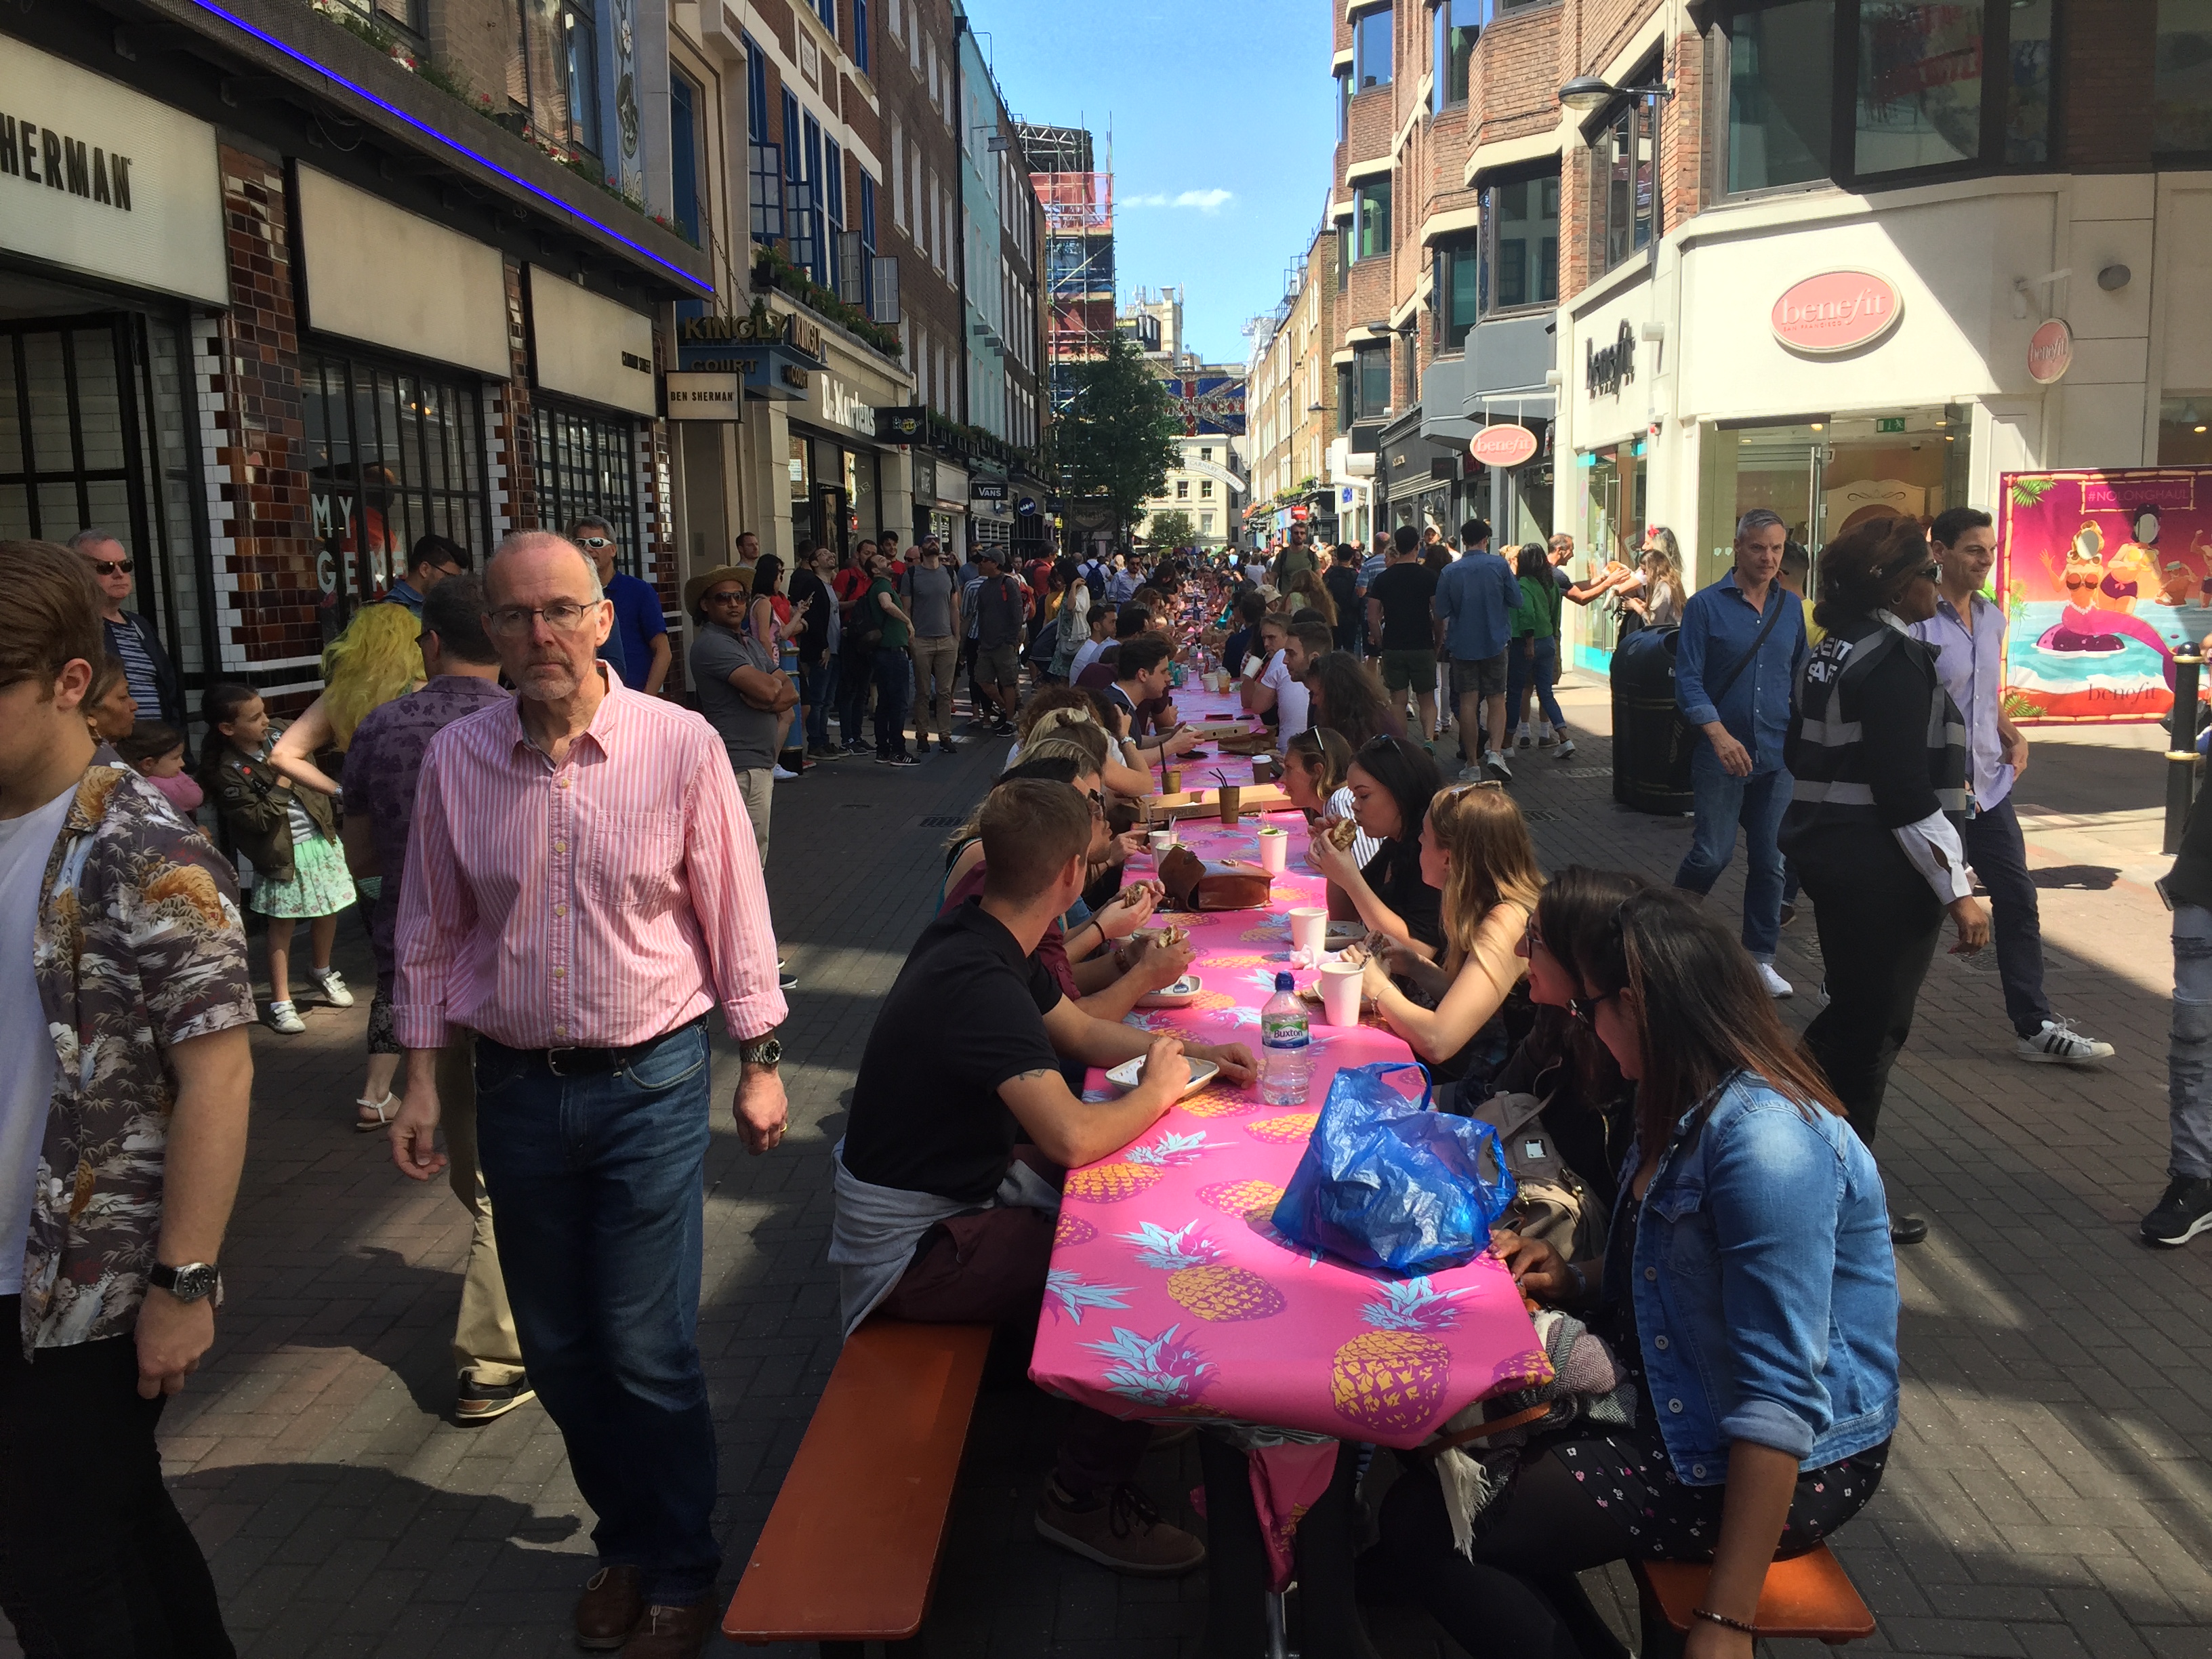 A long, narrow table stretches down the narrow Carnaby shopping street, with people sat on each side enjoying their picnics. The tablecloth is pink with images of pineapples. Many more people are walking down the street on each side.